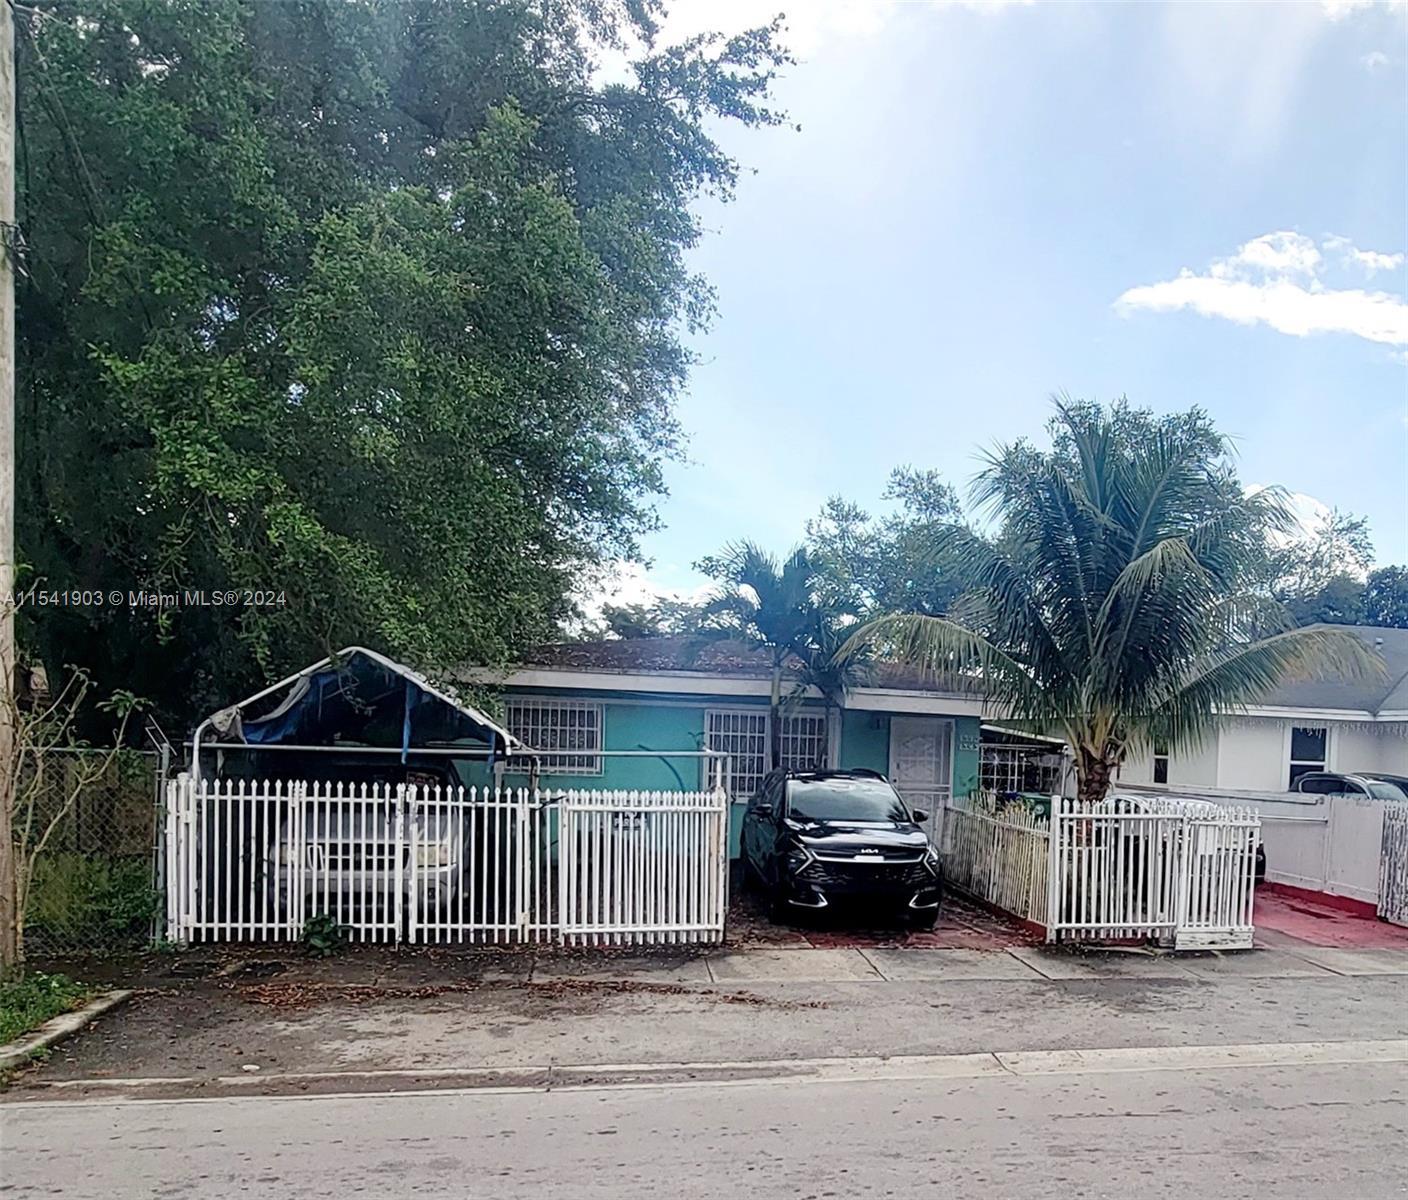 Photo of 1540 NW 32nd St in Miami, FL